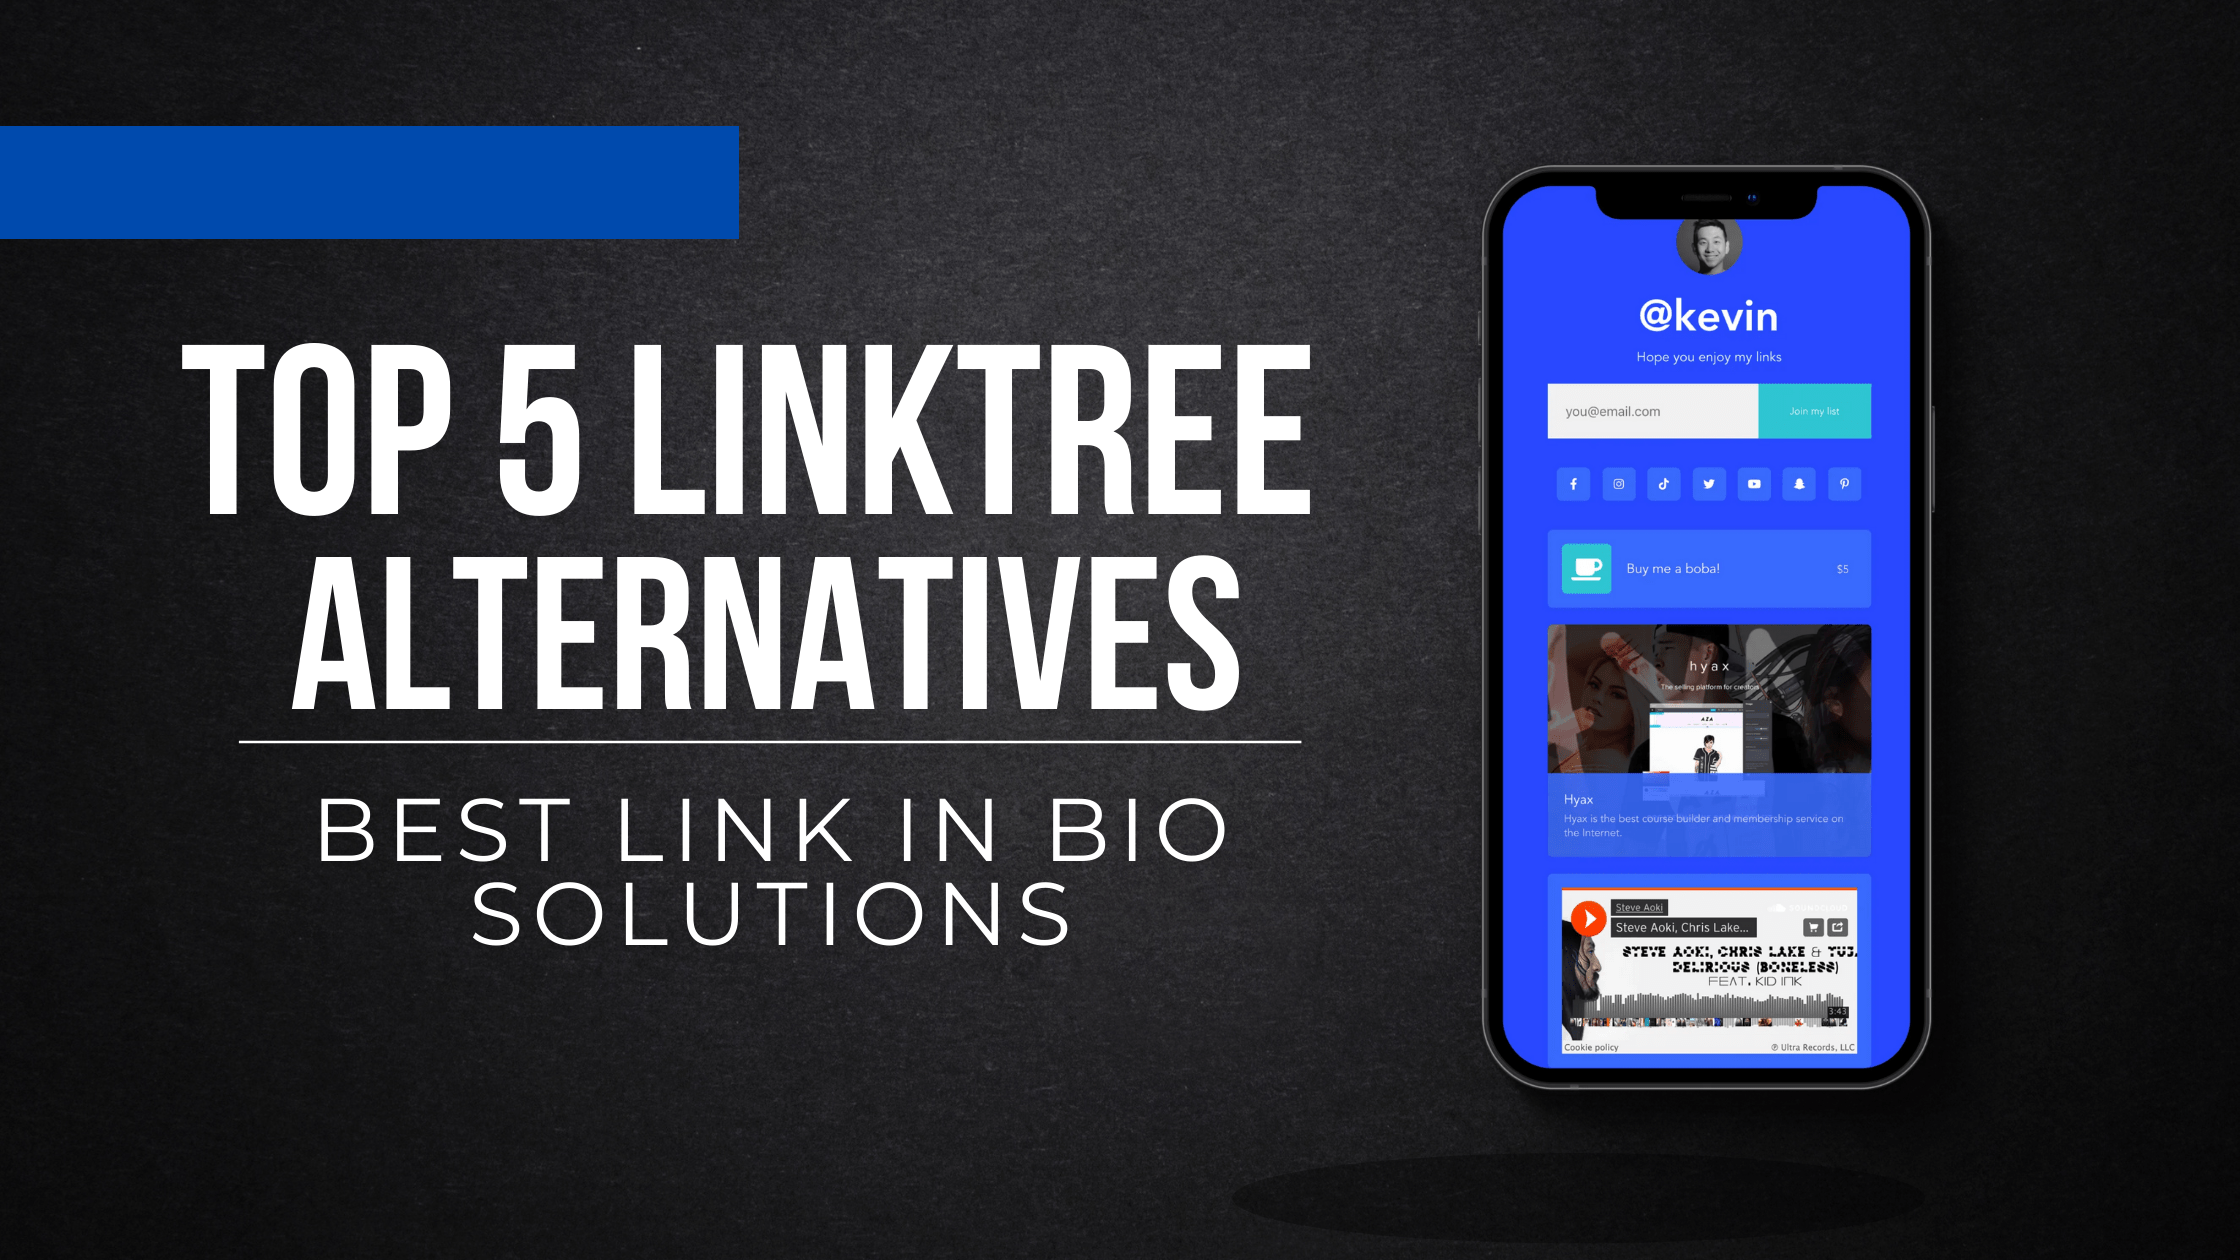 7 Of The Best Linktree Alternatives To Try Out in 2021 